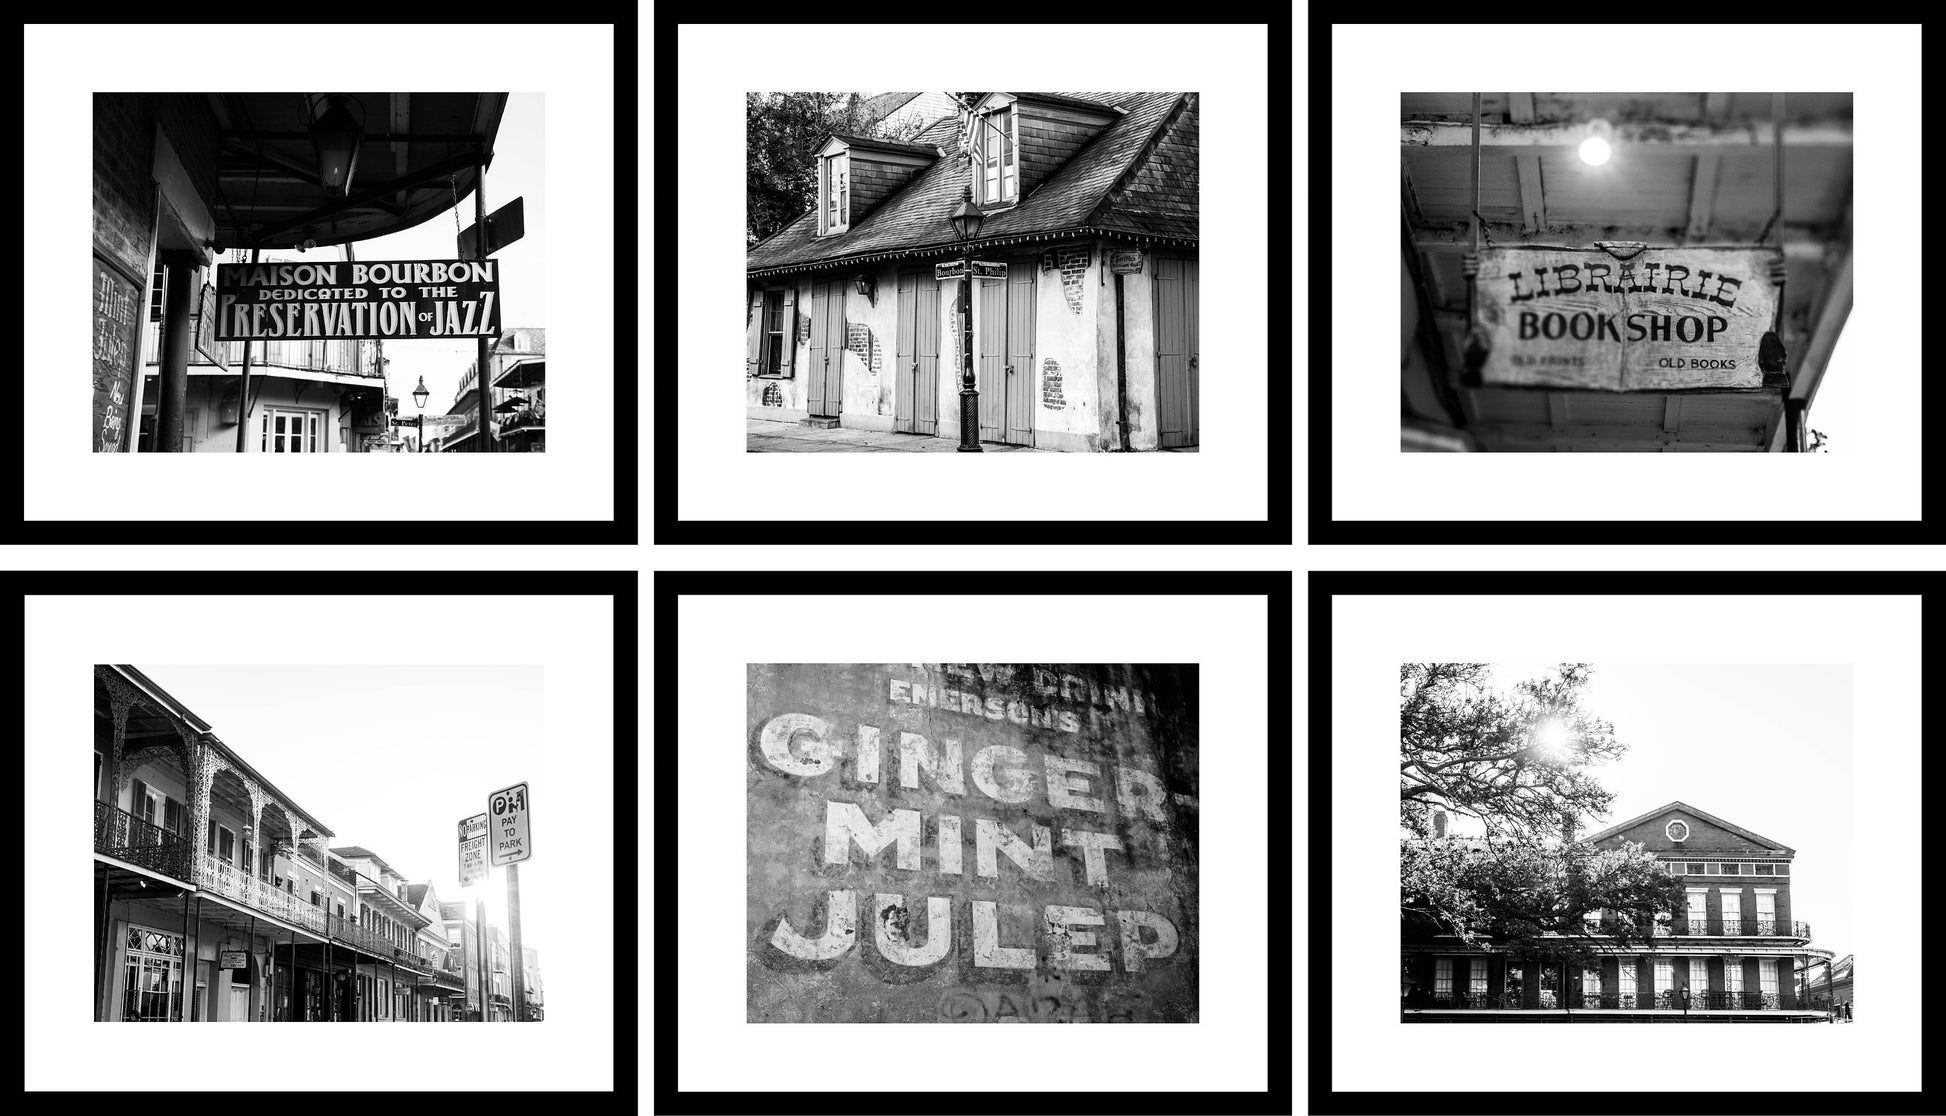 six black and white photographs of buildings and signs